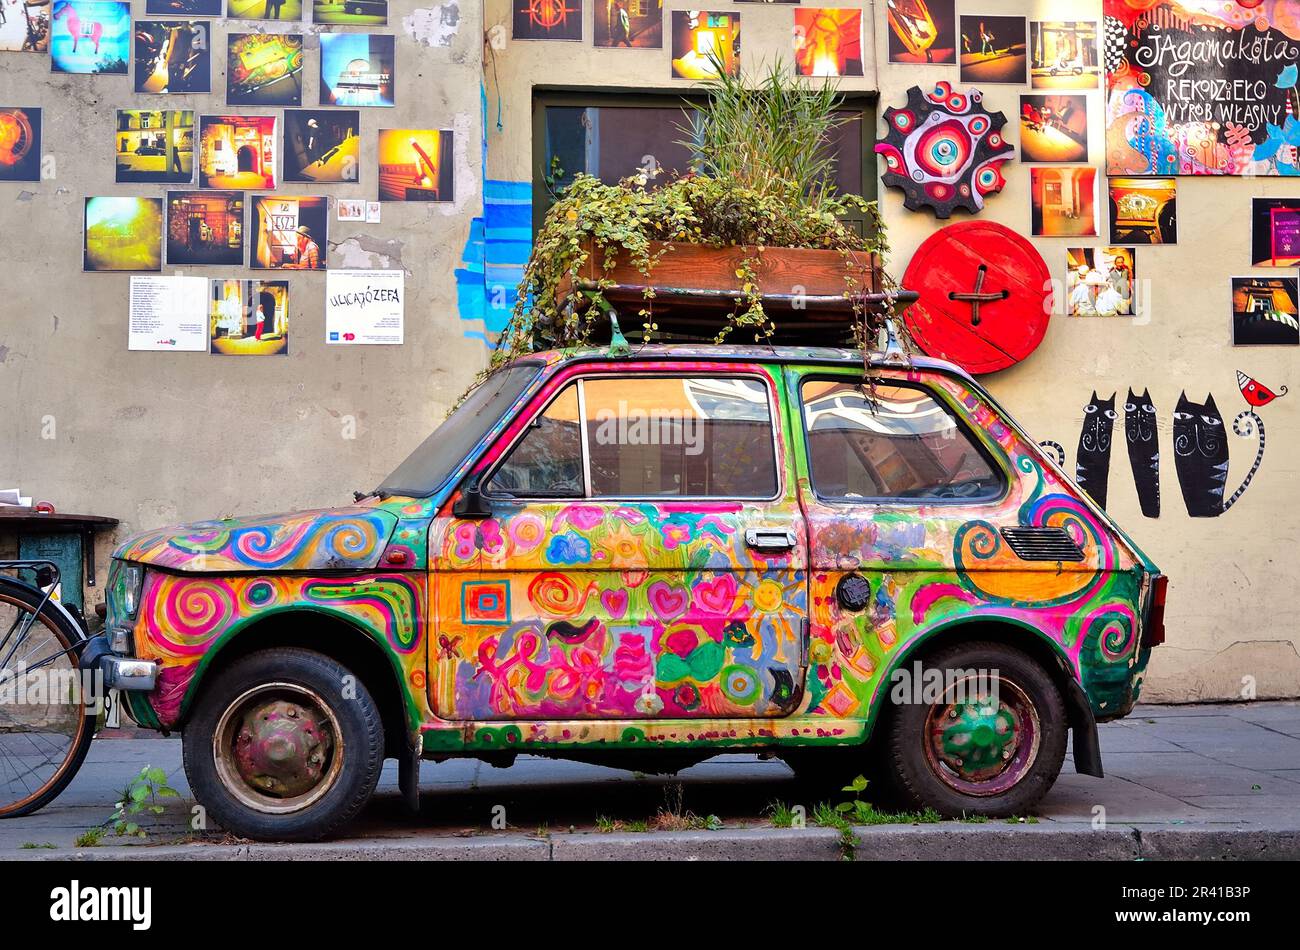 Krakow, Poland - October 21, 2012: Old Polish car Fiat 126 placed as a exhibit of local manufacture. Colorful car is part of the gallery, located on t Stock Photo